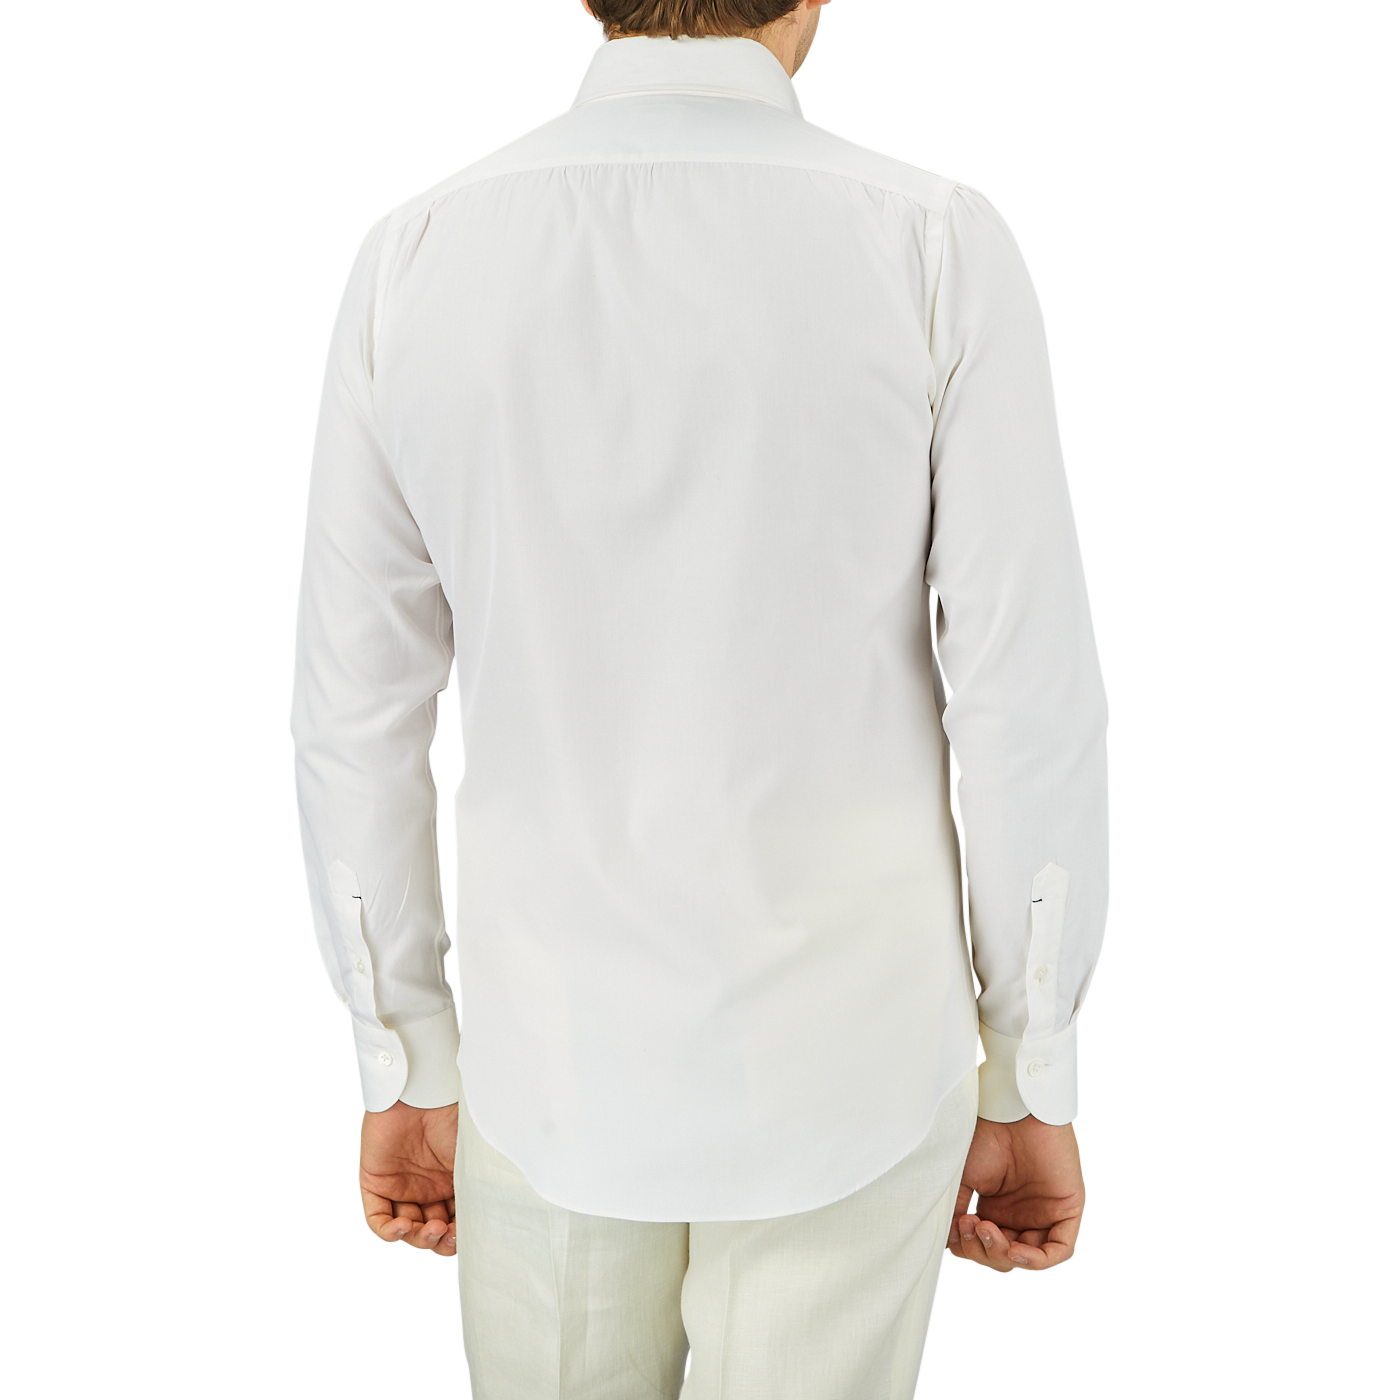 Rear view of a man wearing an Off White Cotton Twill BD Slim Shirt by Mazzarelli and light green pants, standing against a gray background.